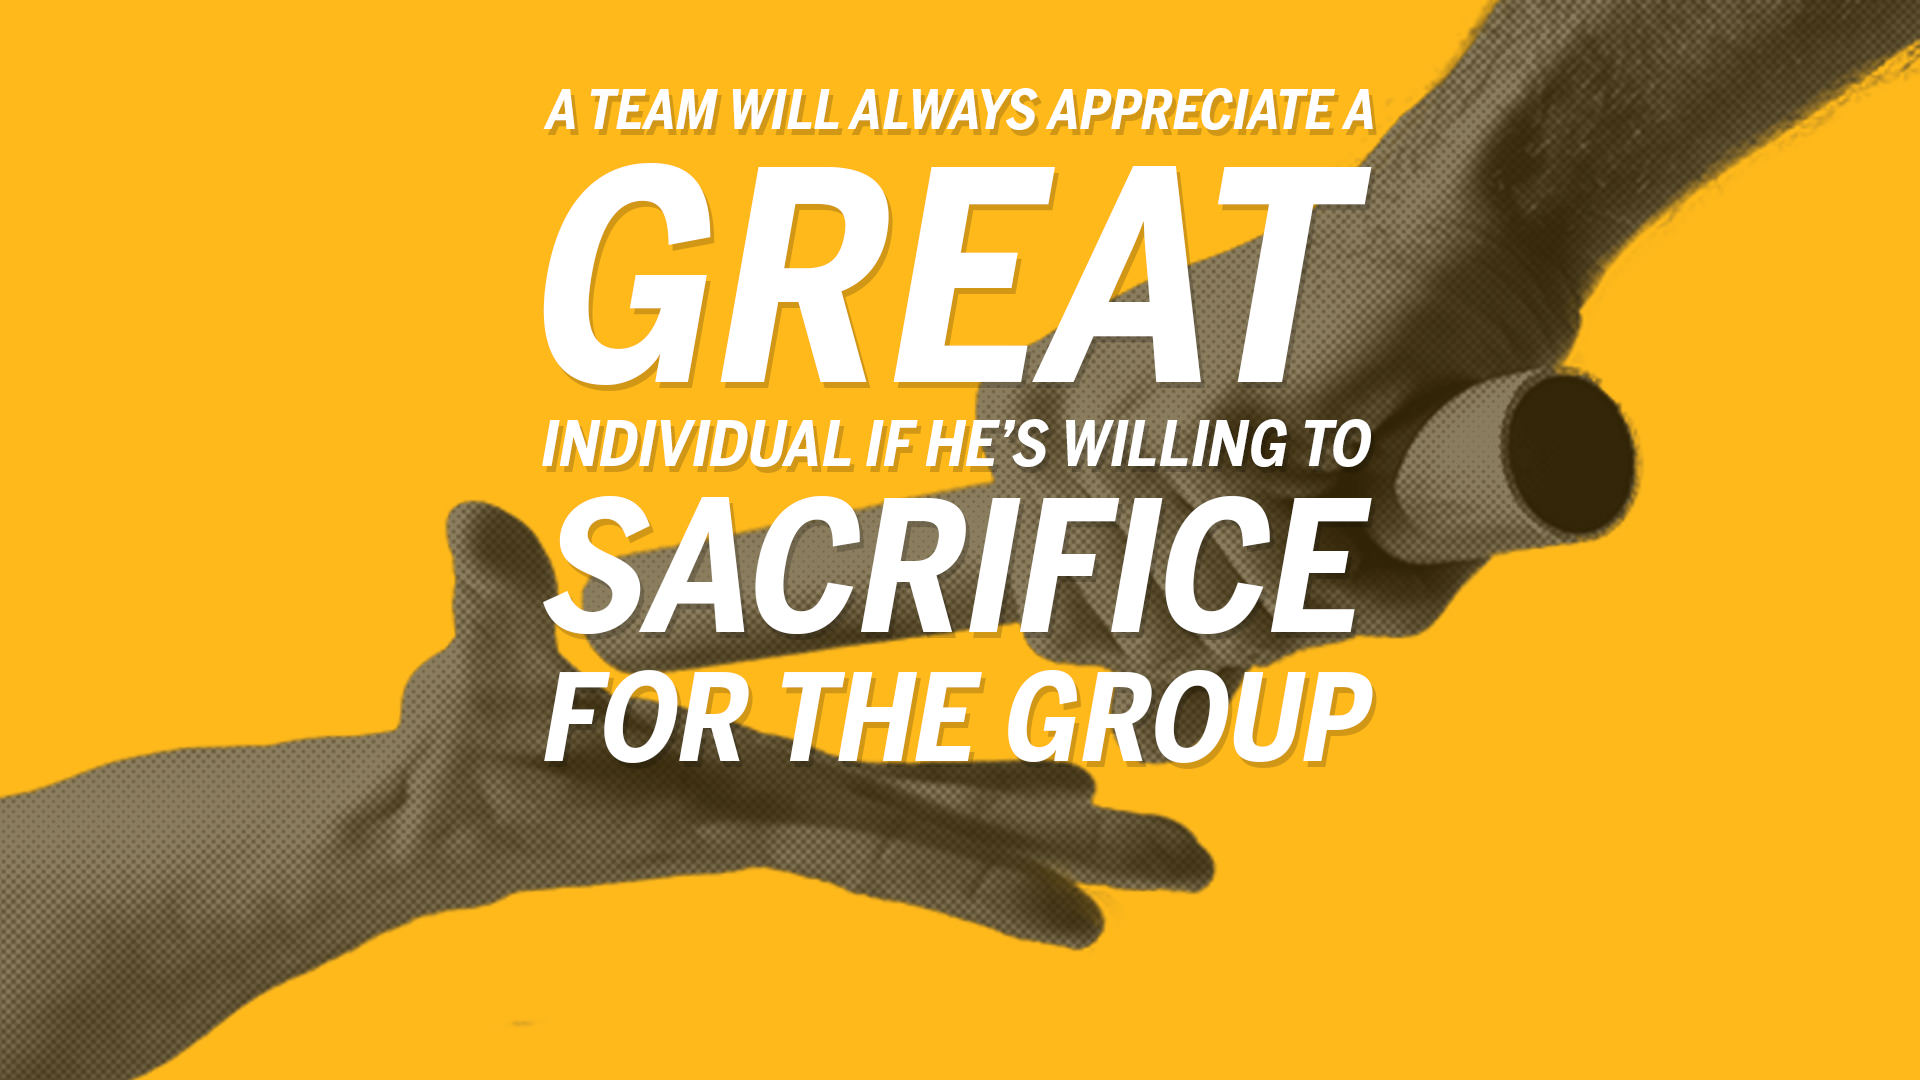 a team will always appreciate a great individual if he’s willing to sacrifice for the group